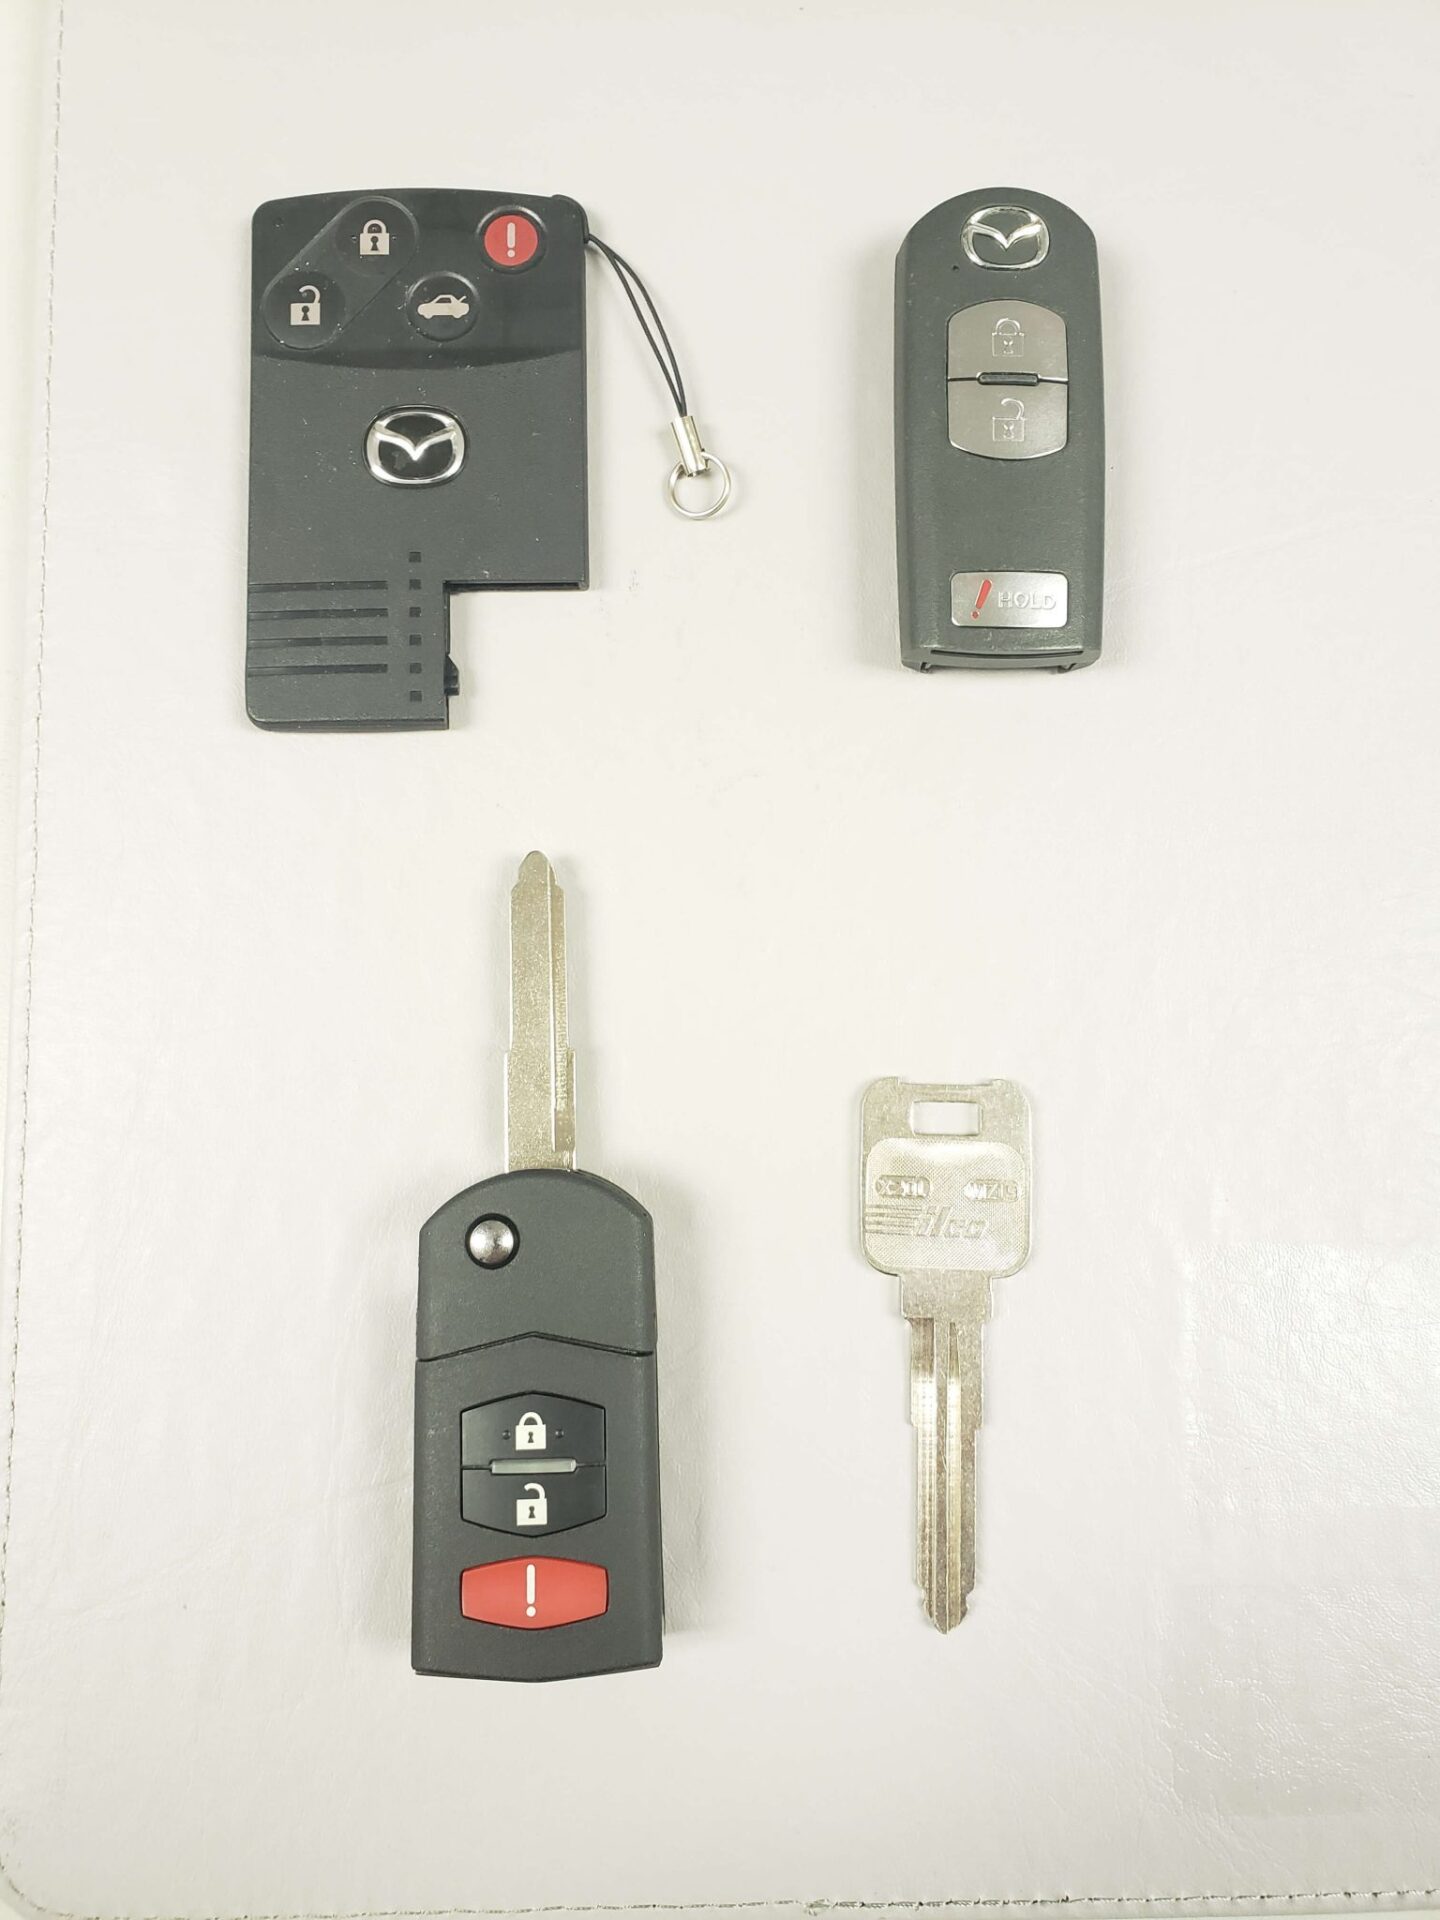 Mazda 3 Key Replacement What To Do, Options, Costs & More